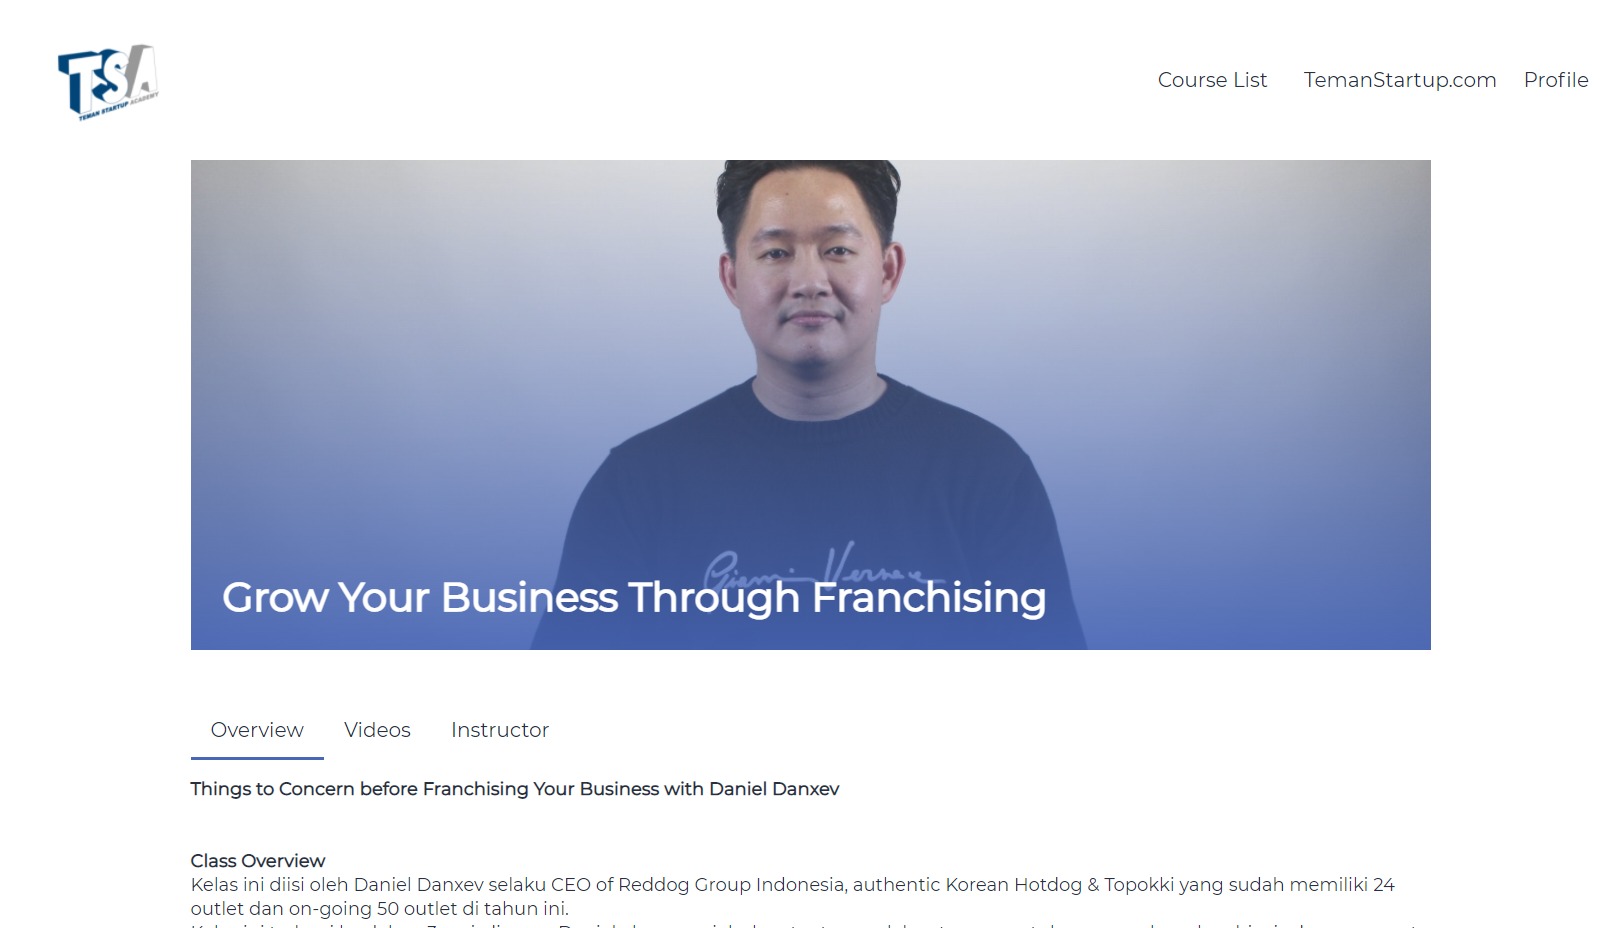 Course Page of Teman Startup Academy